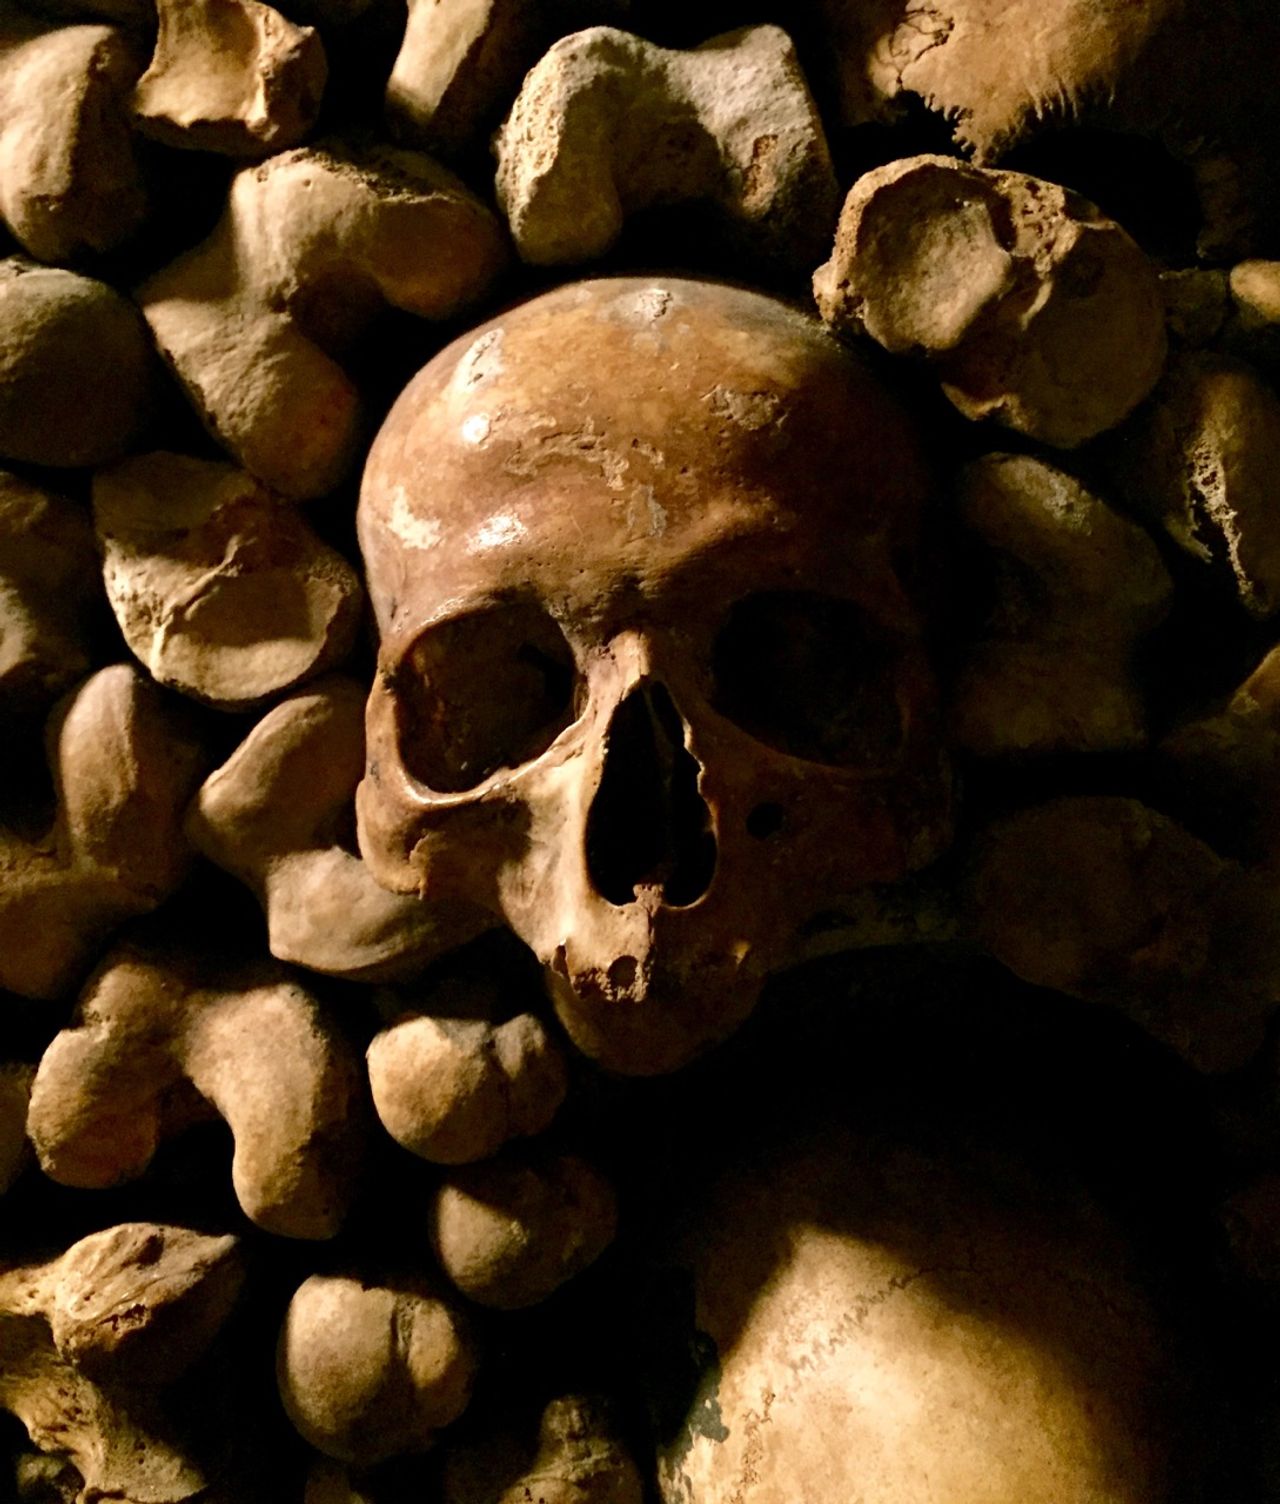 A skull amongst other bones in the catacombs